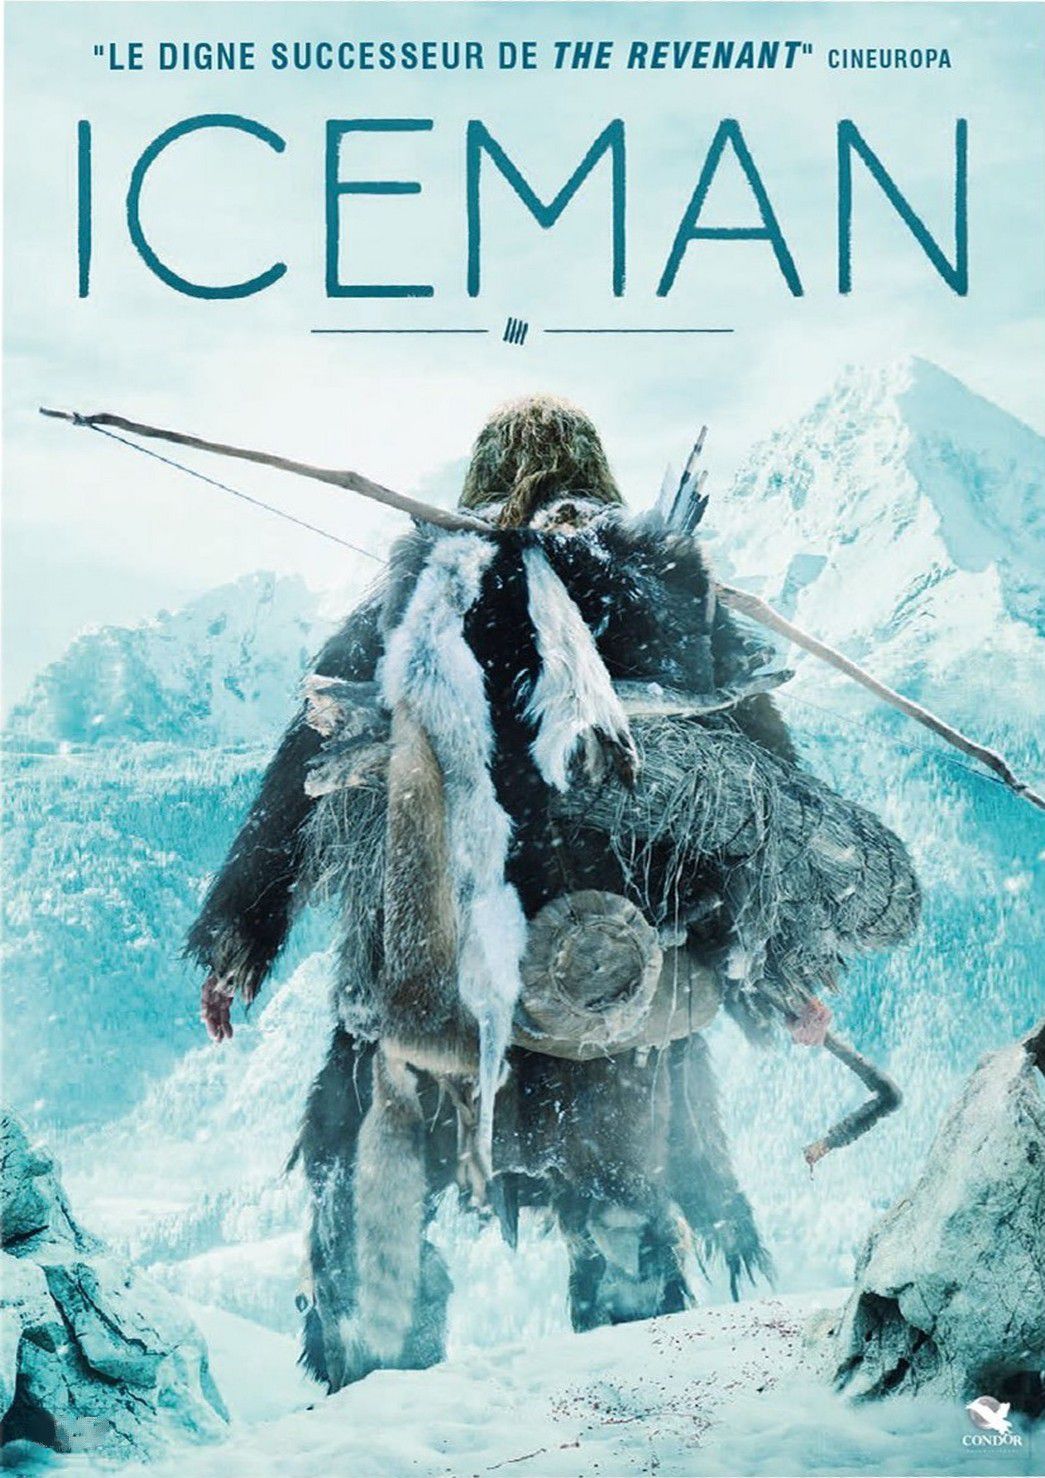 Iceman - Film (2017) streaming VF gratuit complet